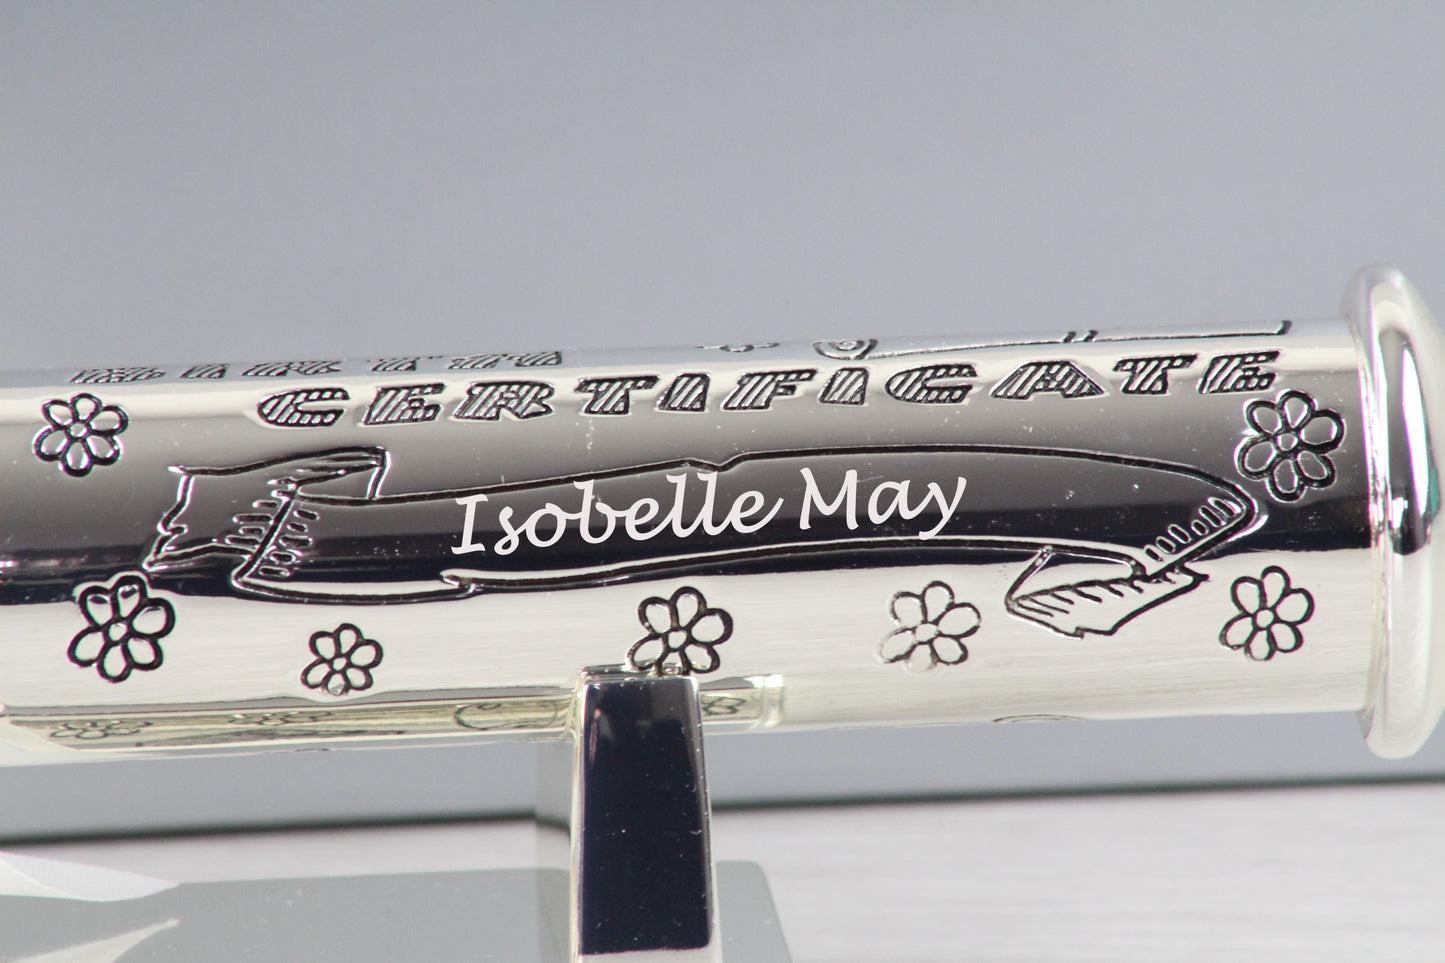 Below "BIRTH CERTIFICATE" engraved and flowers, there's also a personalised child's name "Isobelle May" on the holder.